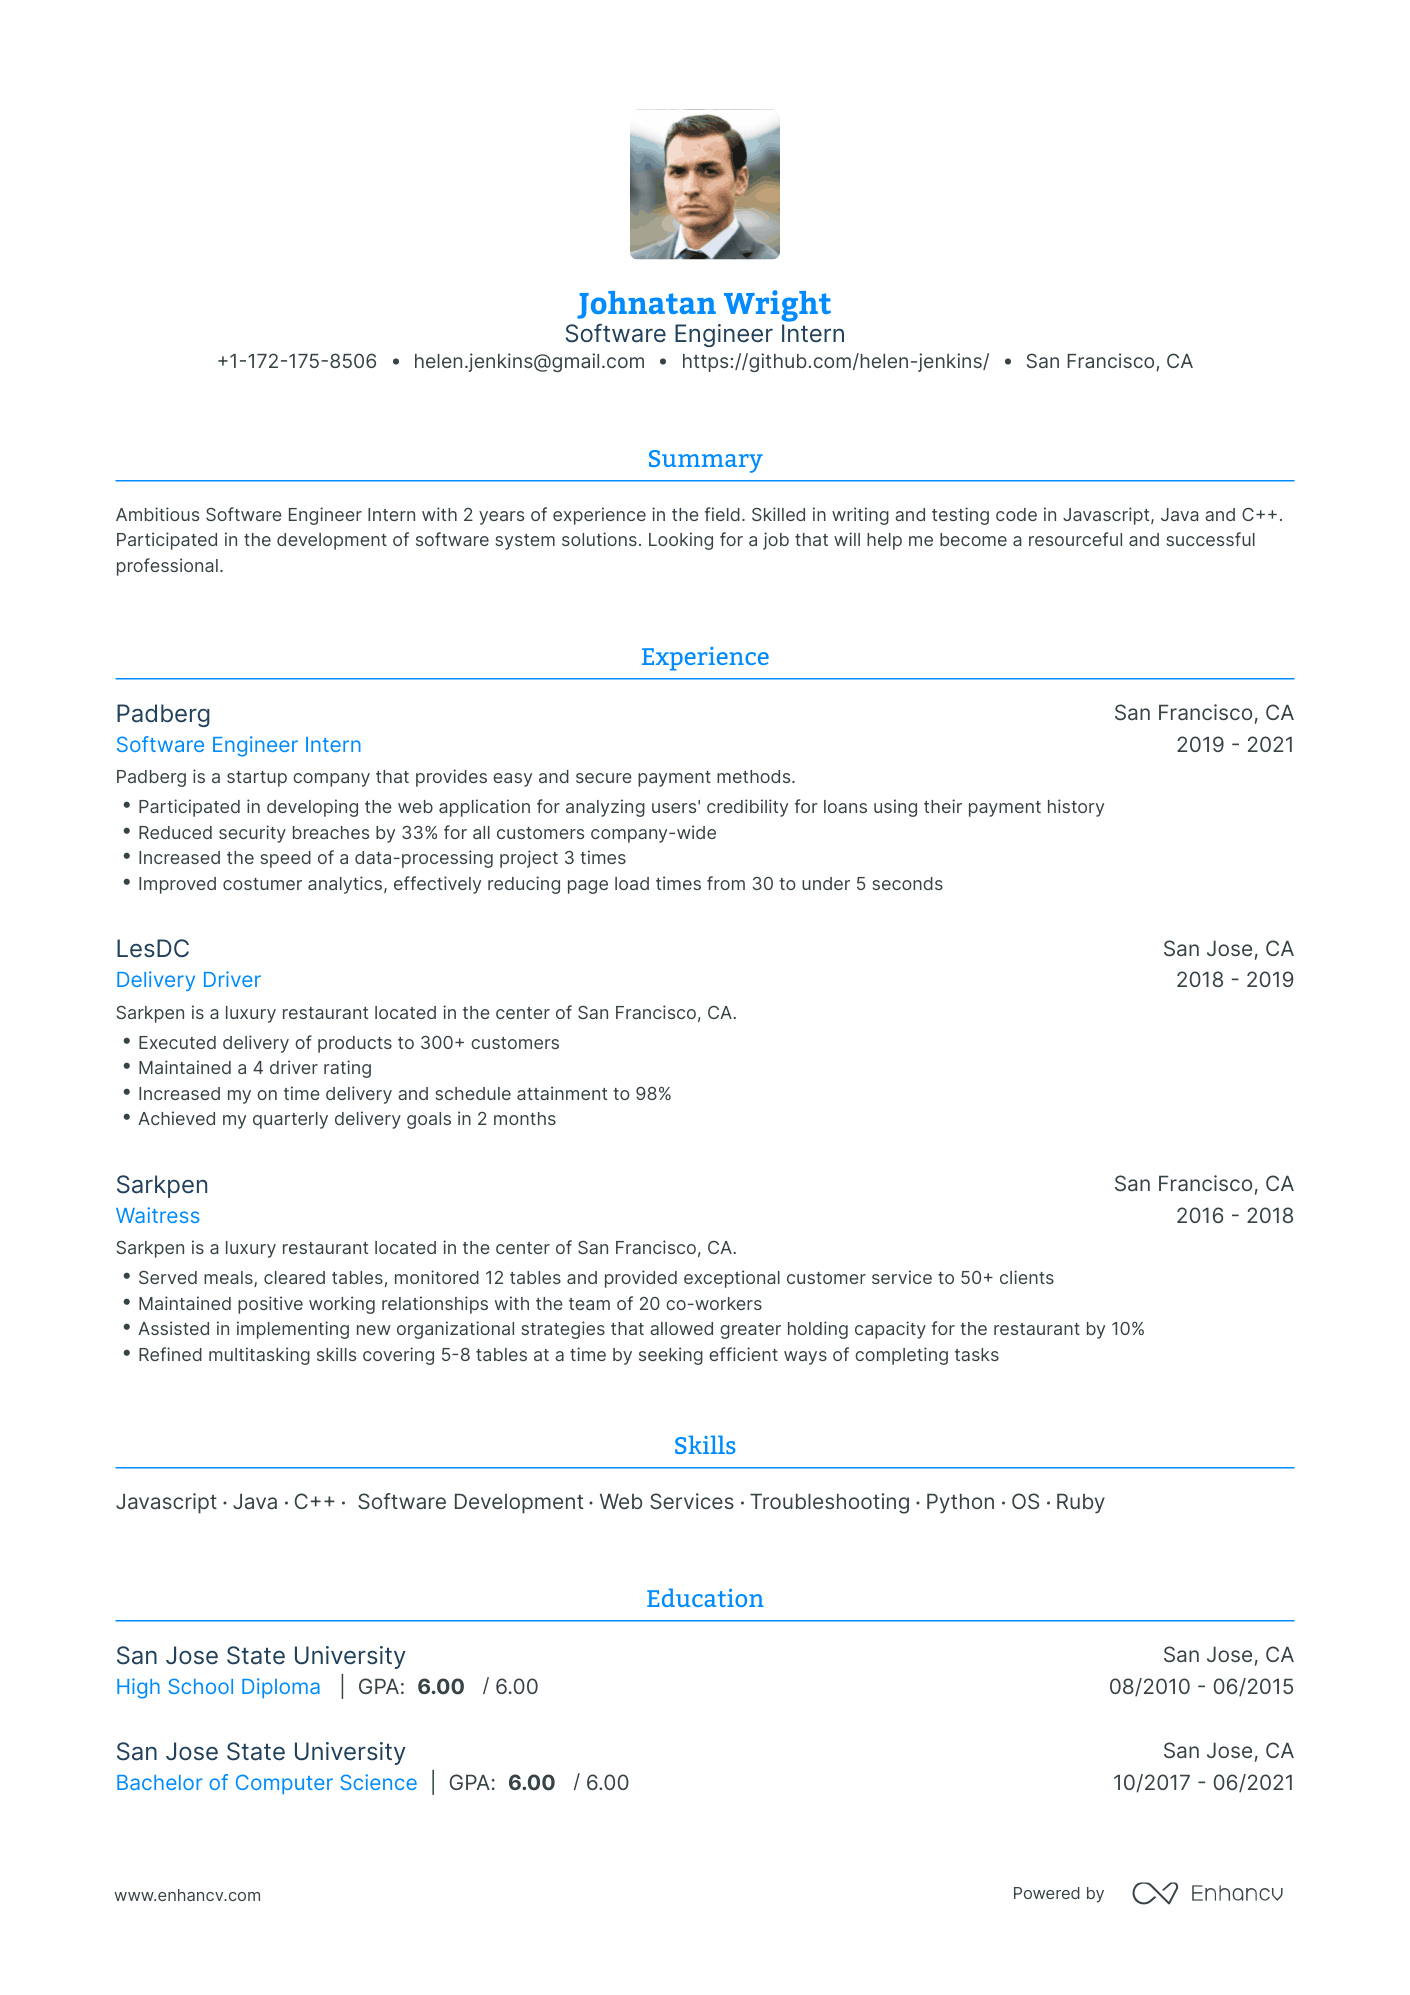 Traditional Software Engineer Intern Resume Template